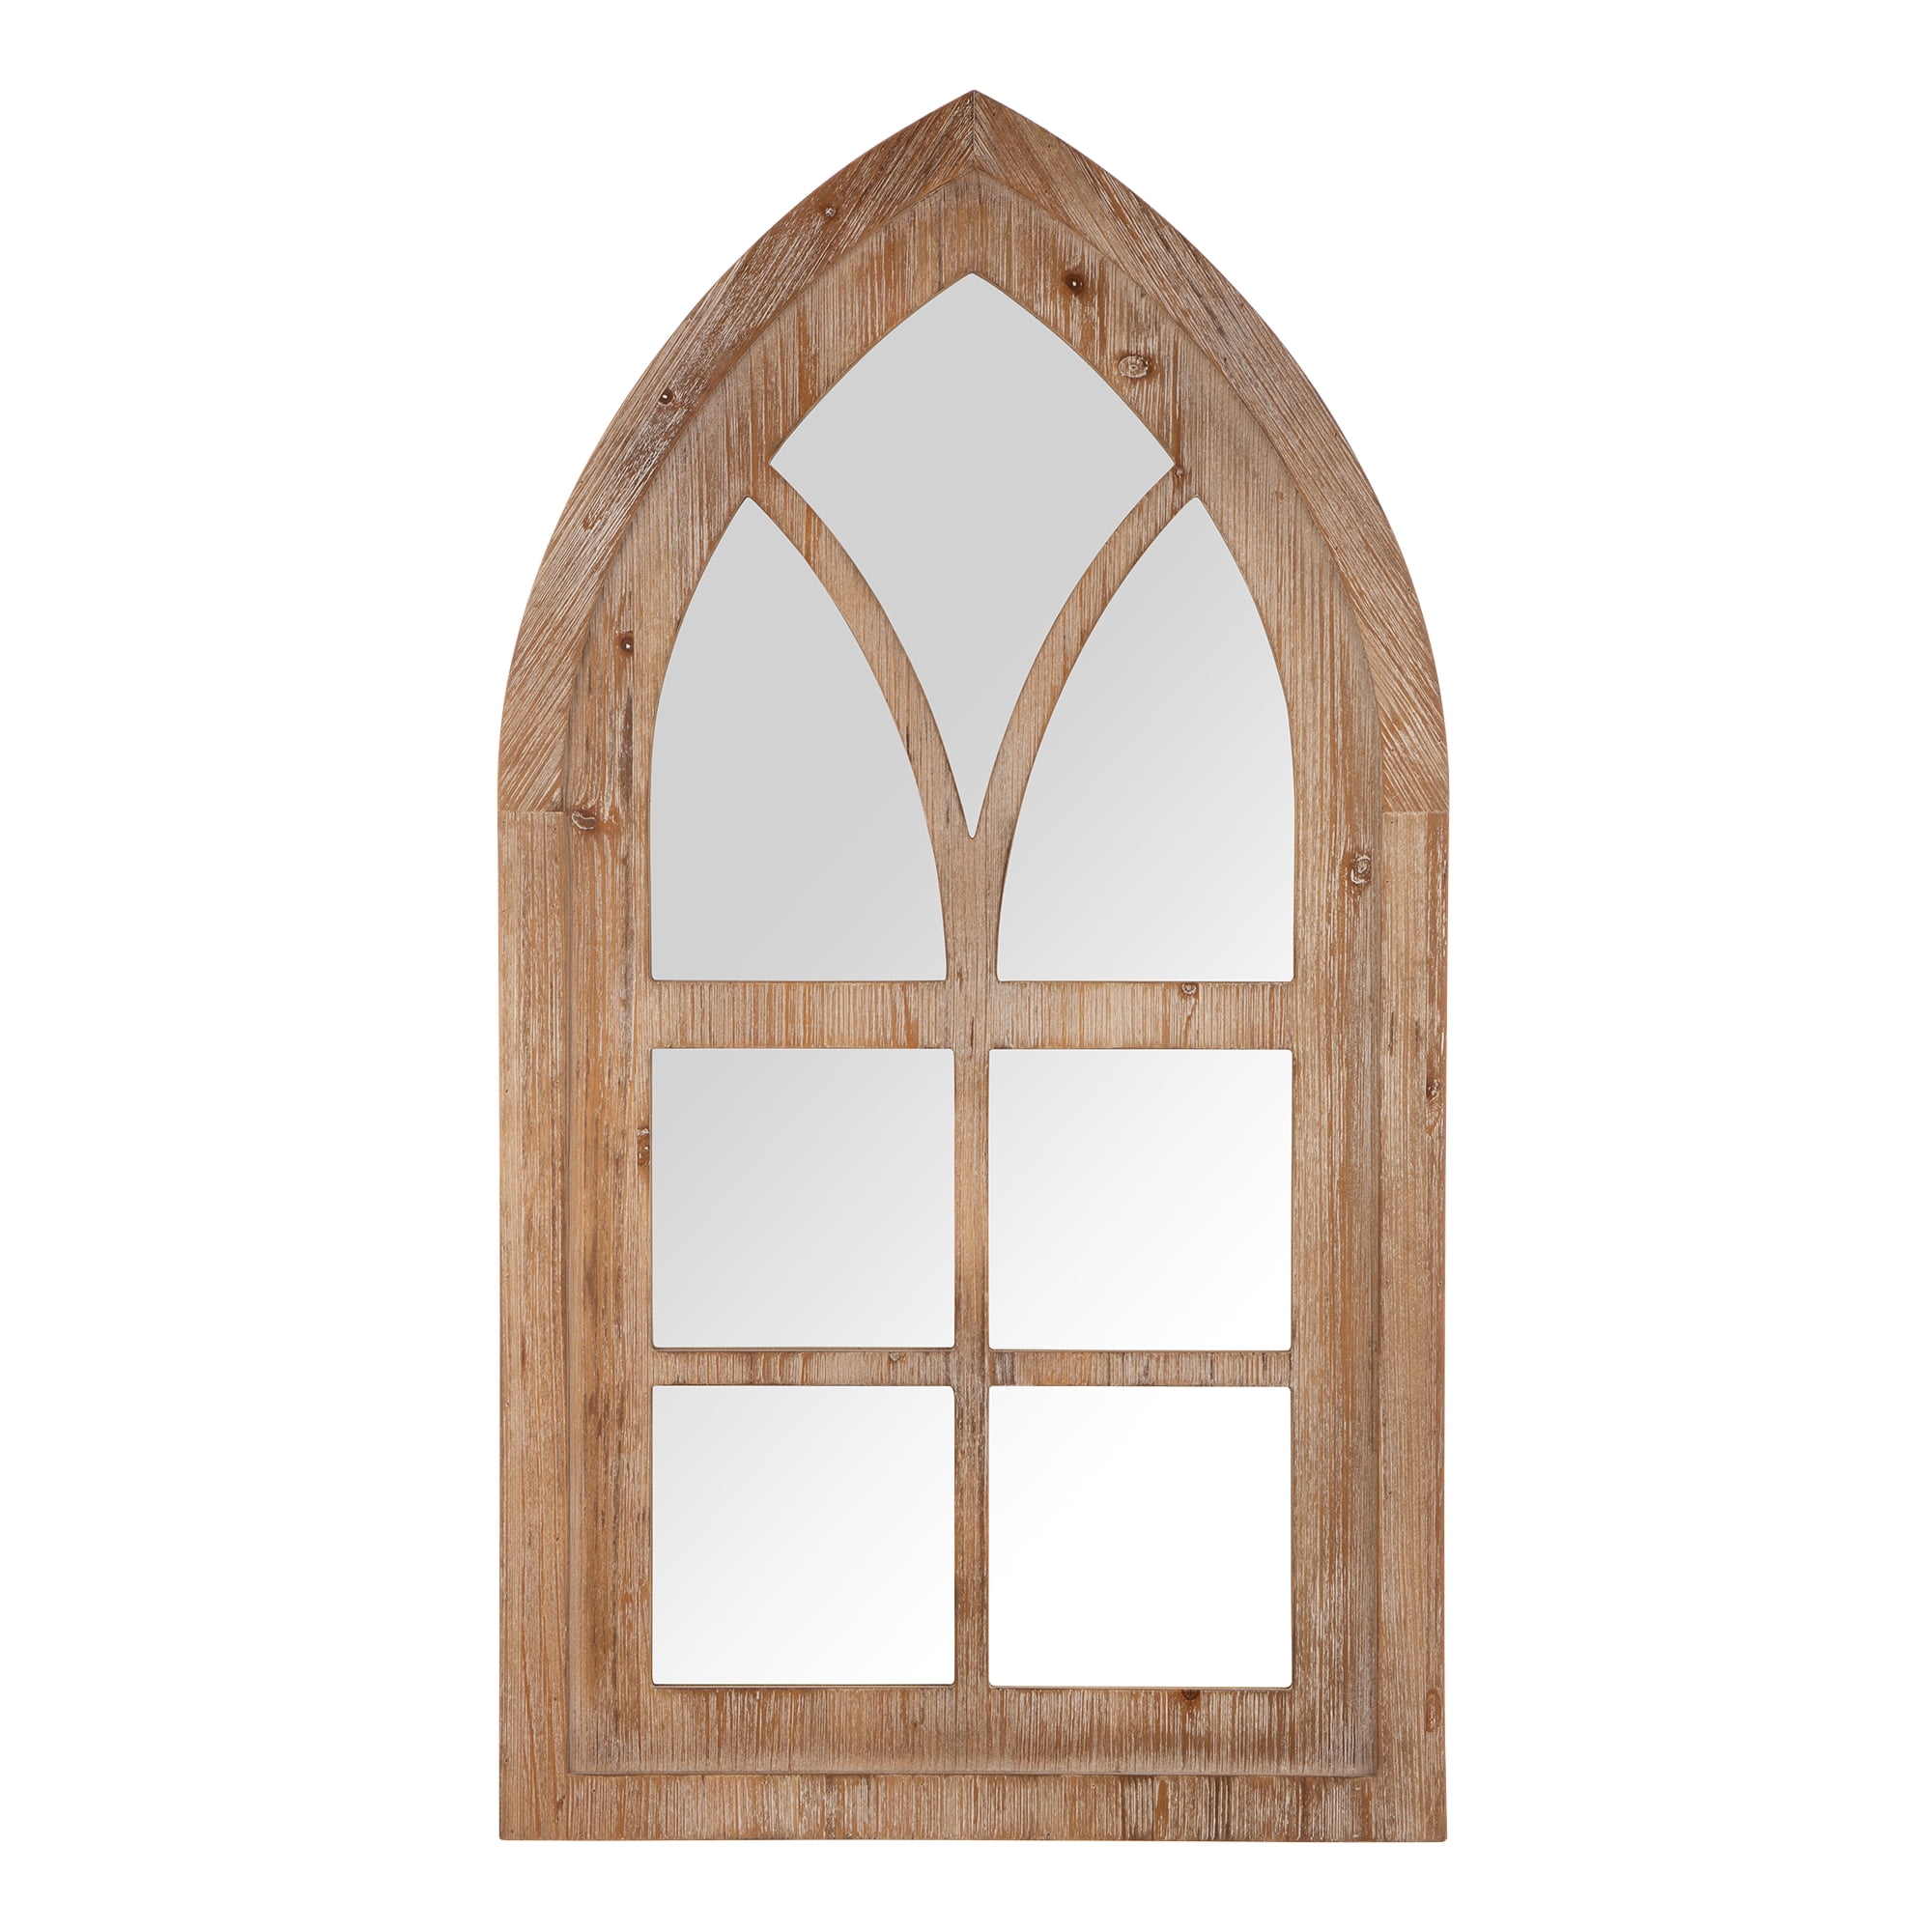 Details about   Farmhouse Arched Window Mirror Metal Wall Art Living Room Decor Wood Frame Brown 